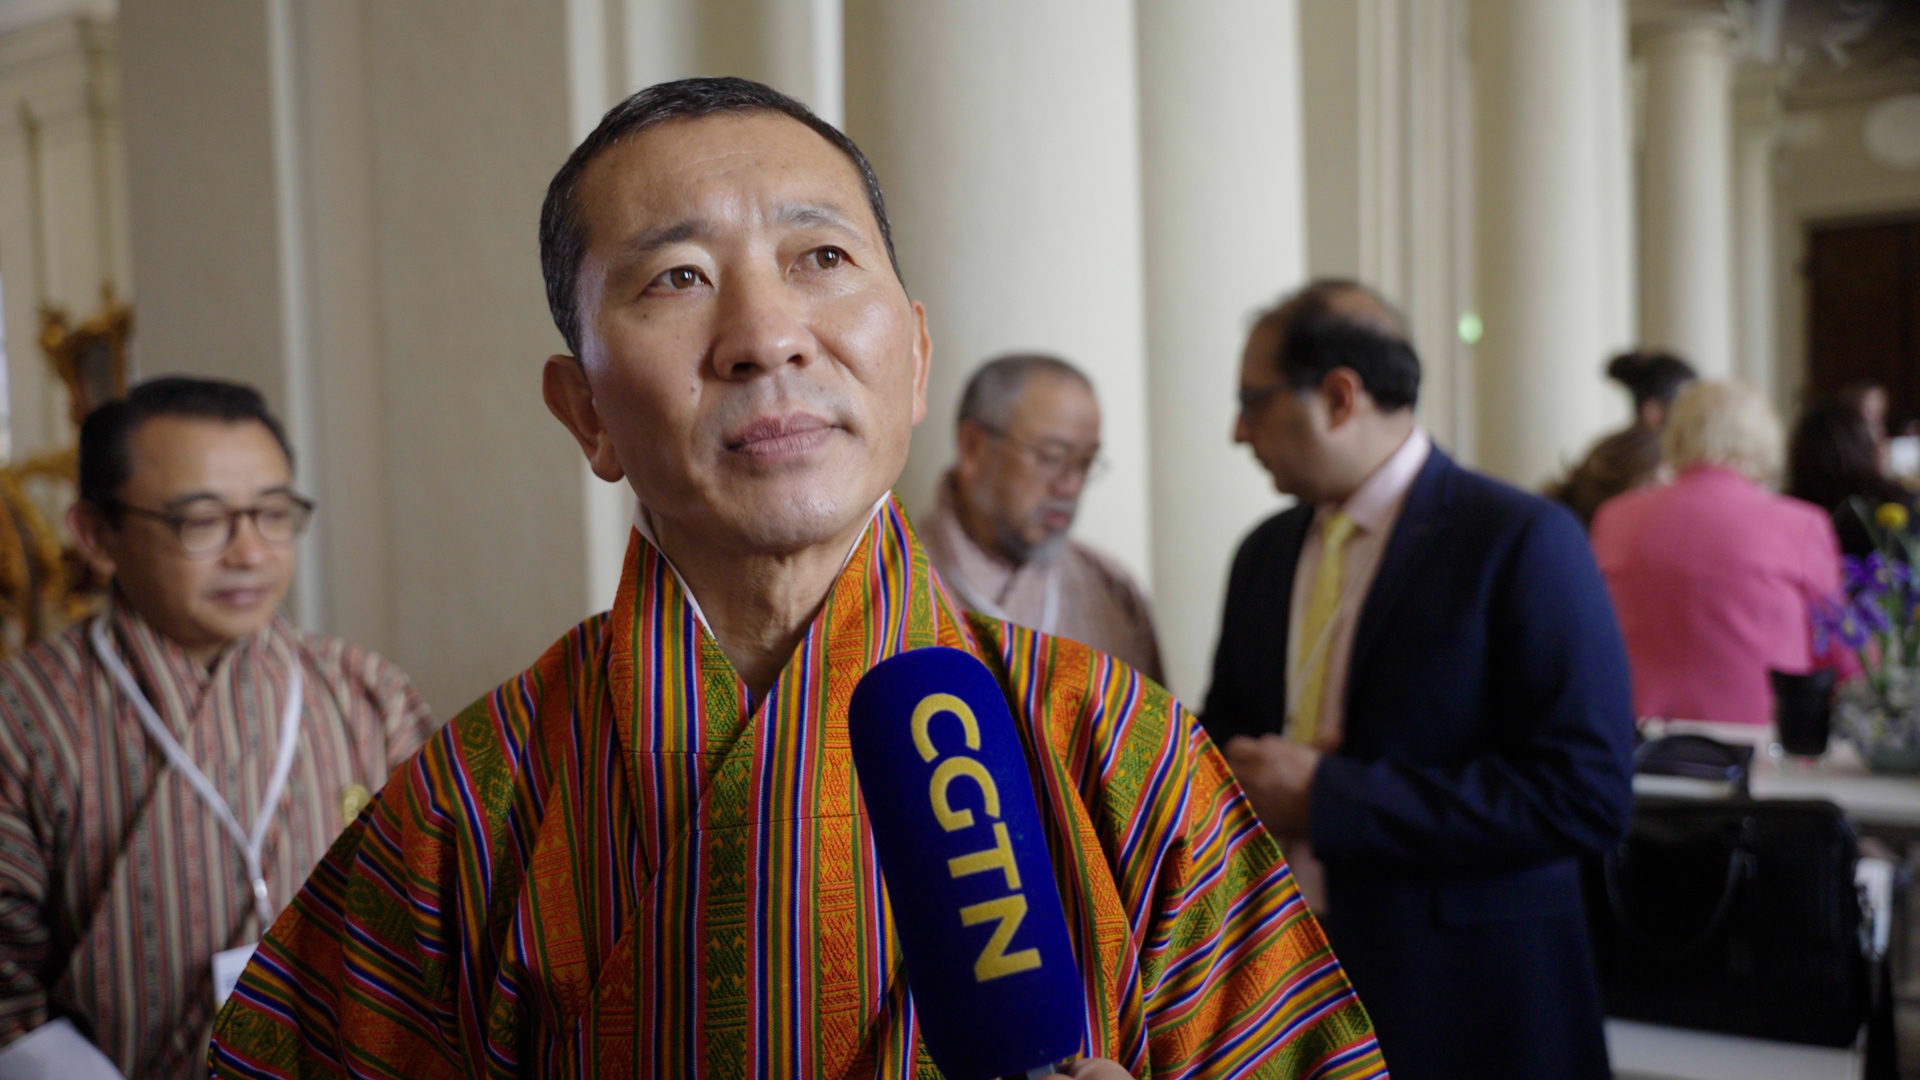 Bhutan is one of the receiving countries of the OPEC Fund./CGTN/Dworschak